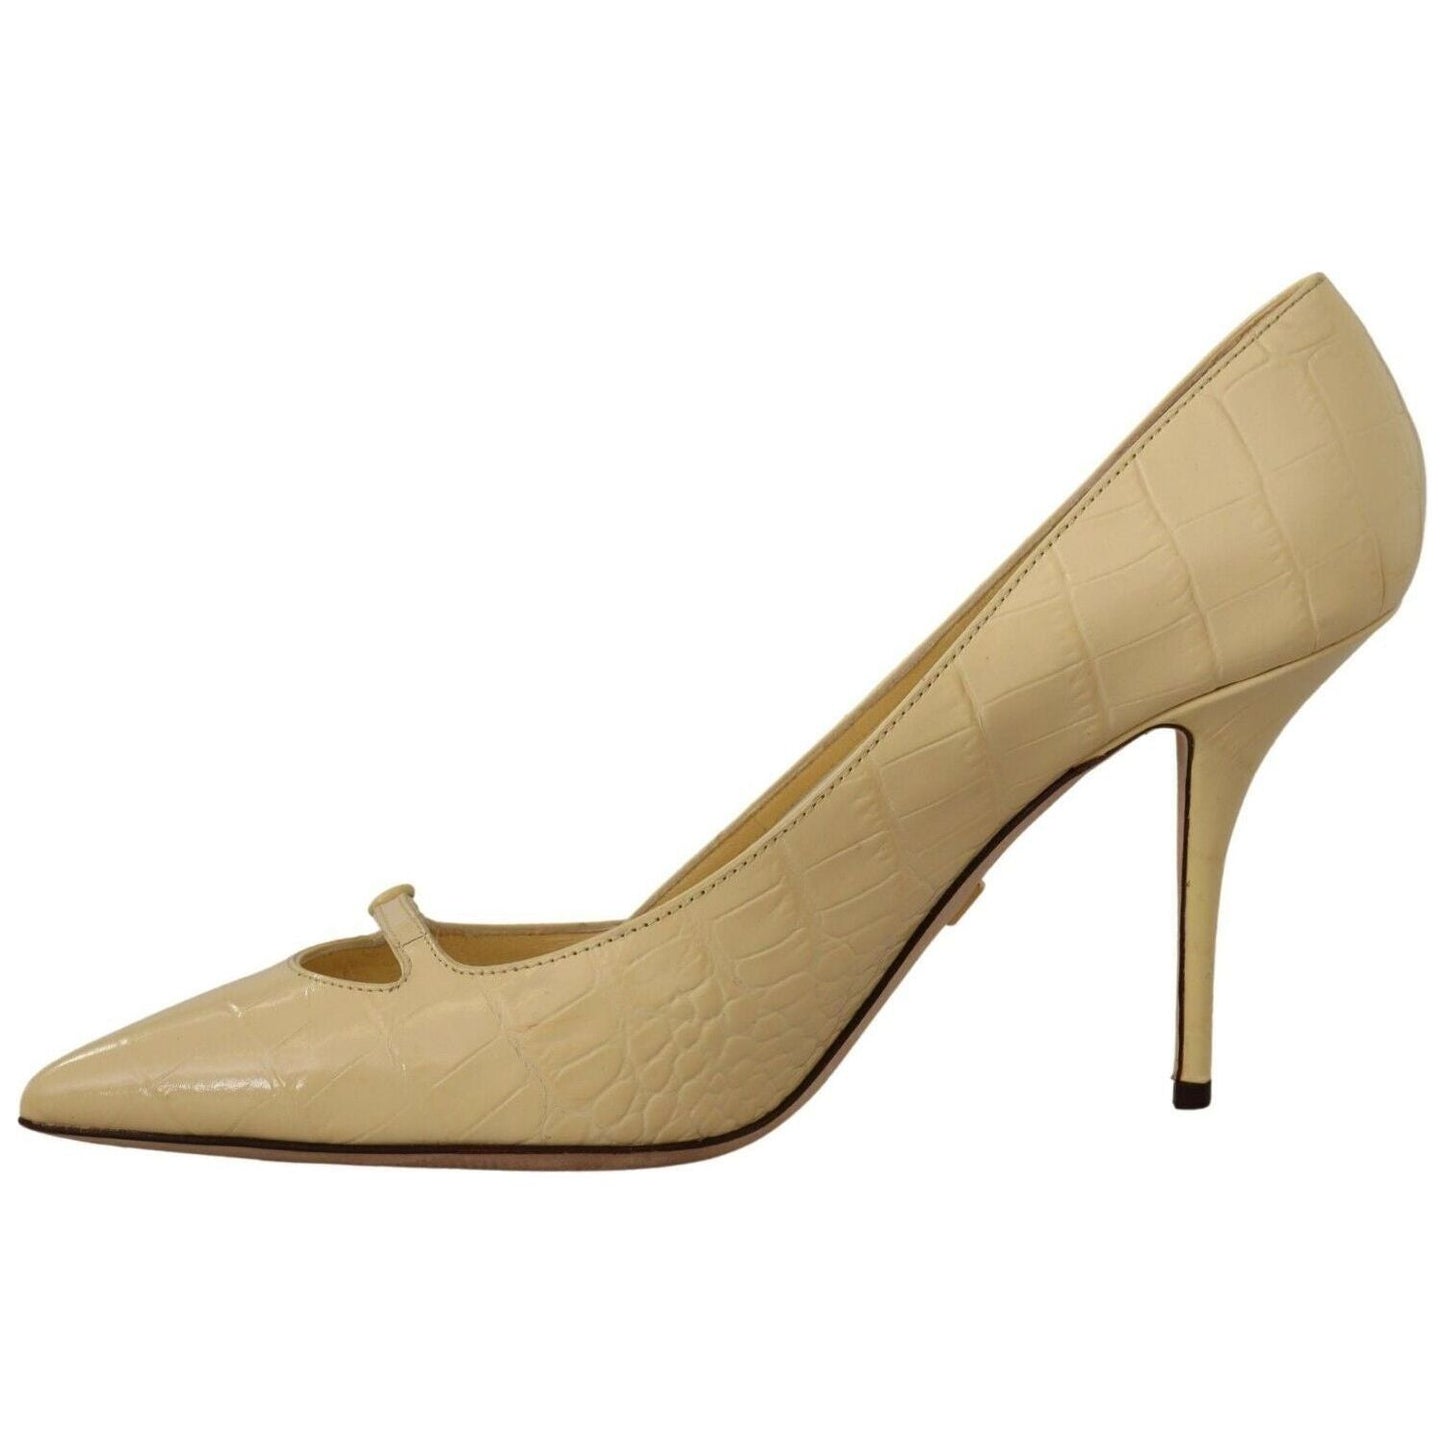 Dolce & Gabbana Chic Pointed Toe Leather Pumps in Sunshine Yellow yellow-exotic-leather-stiletto-heel-pumps-shoes